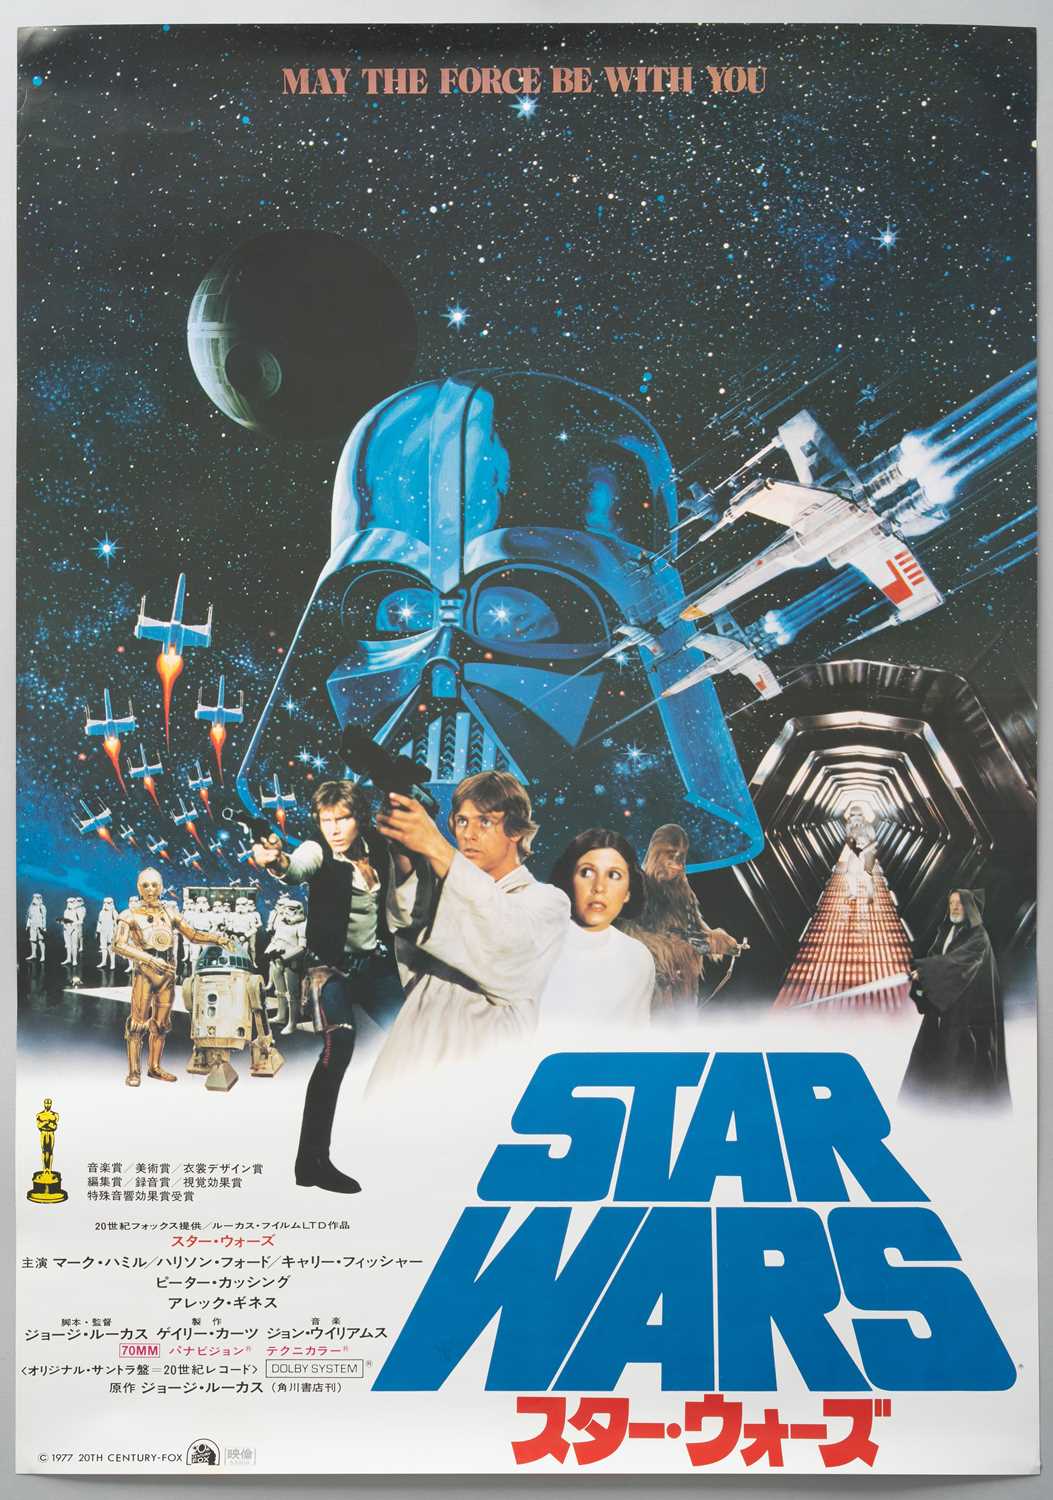 A JAPANESE STAR WARS POSTER SHOWA ERA, 1977 Featuring photographs of the main characters in Star